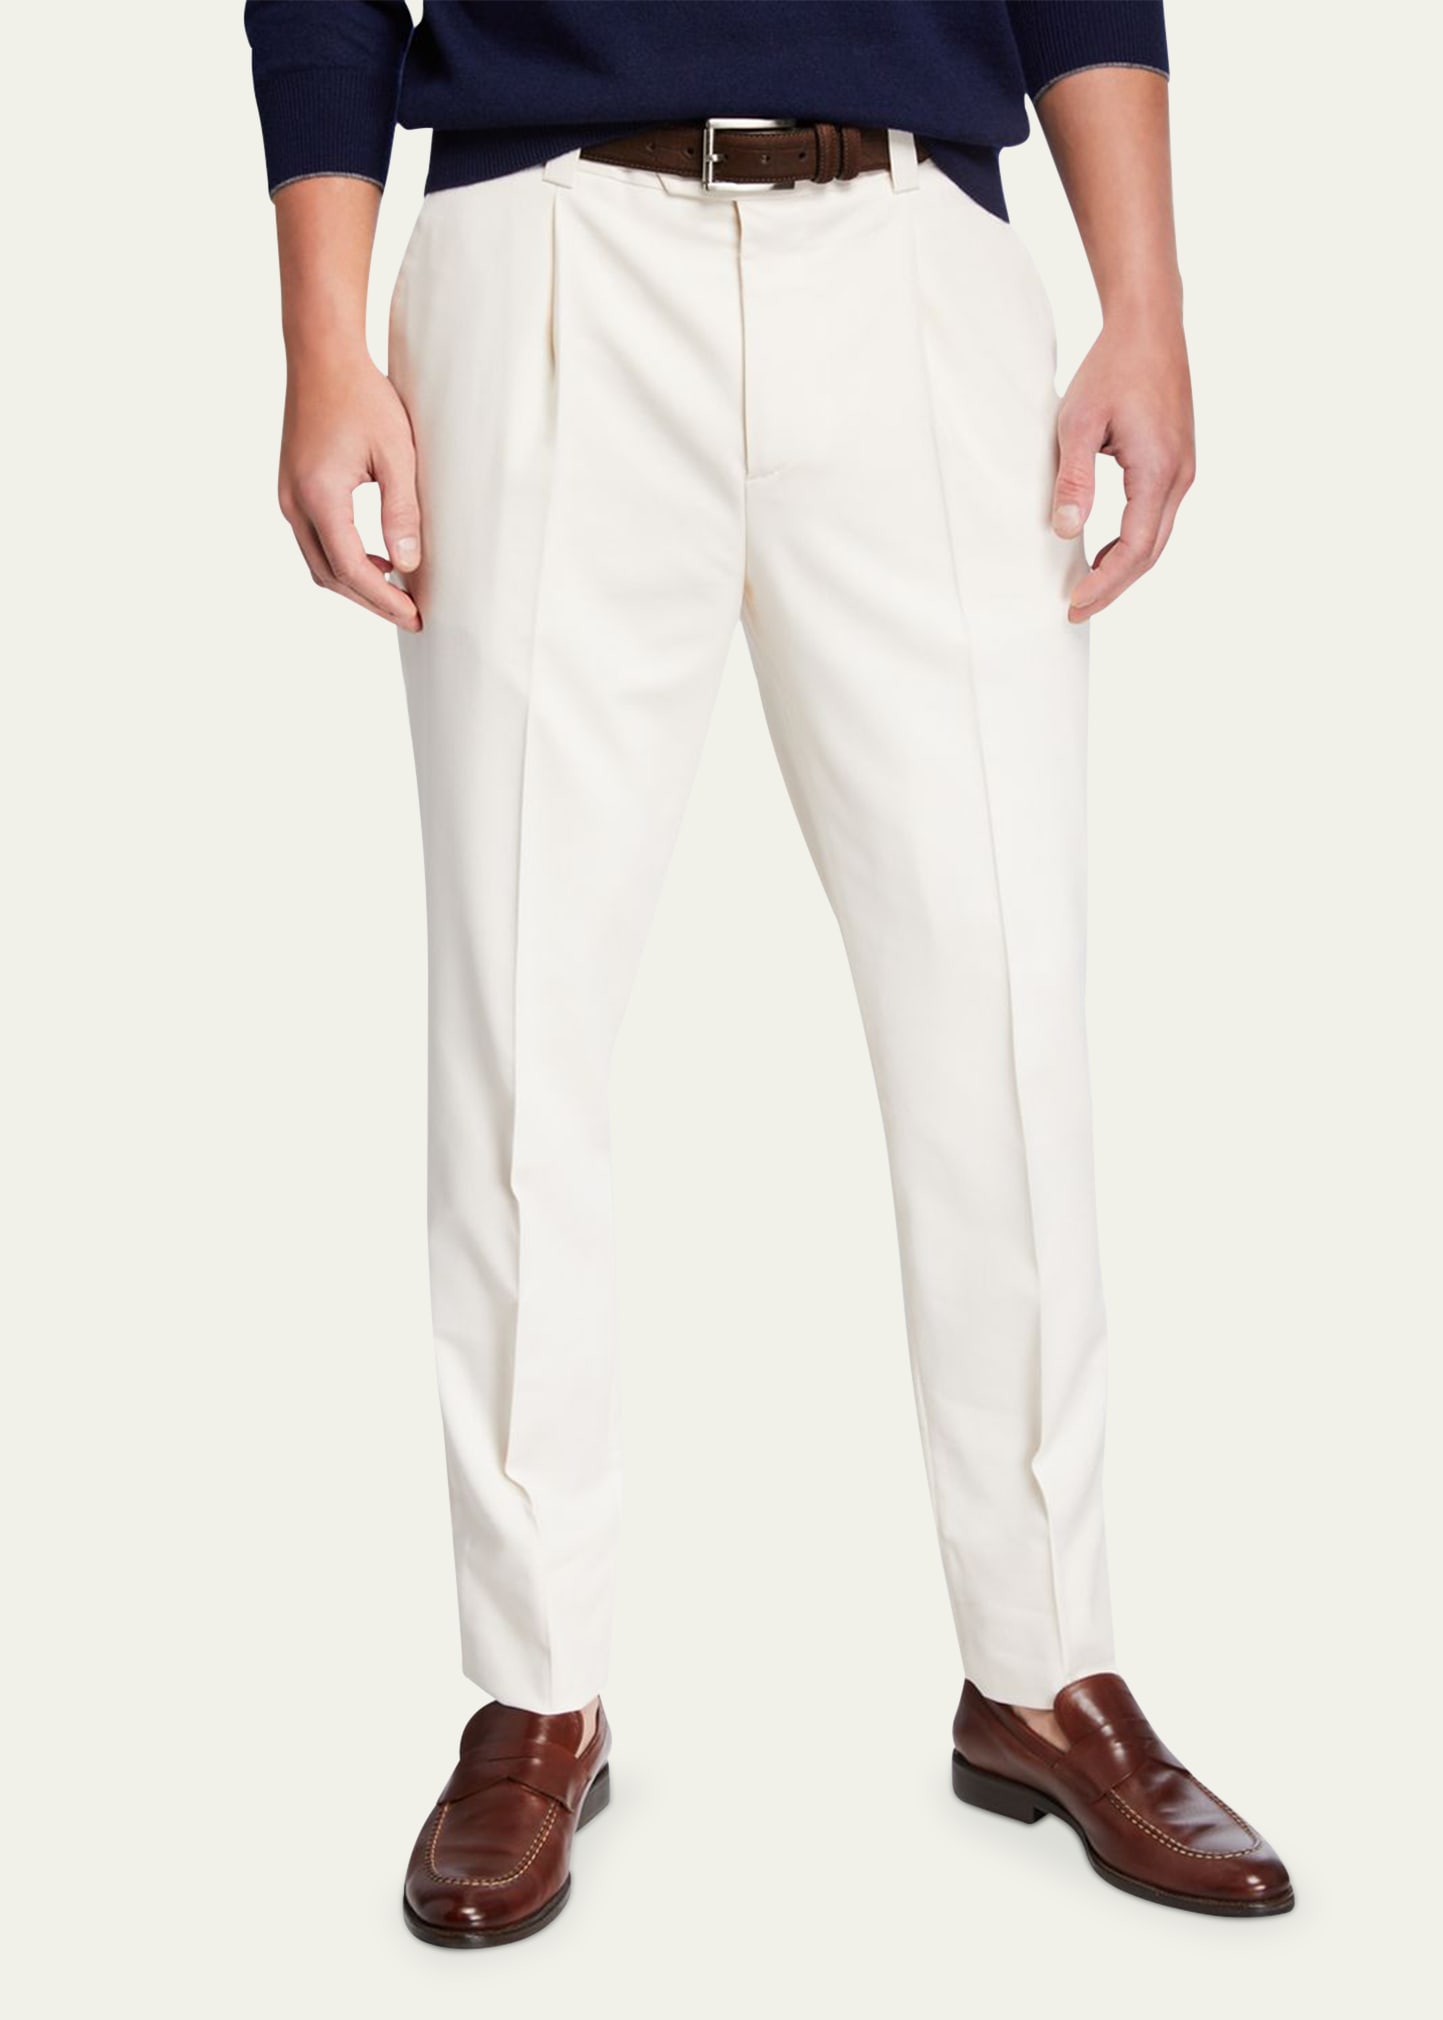 Stella McCartney Synthetic Trouser in Beige Natural Womens Clothing Trousers Slacks and Chinos Full-length trousers 